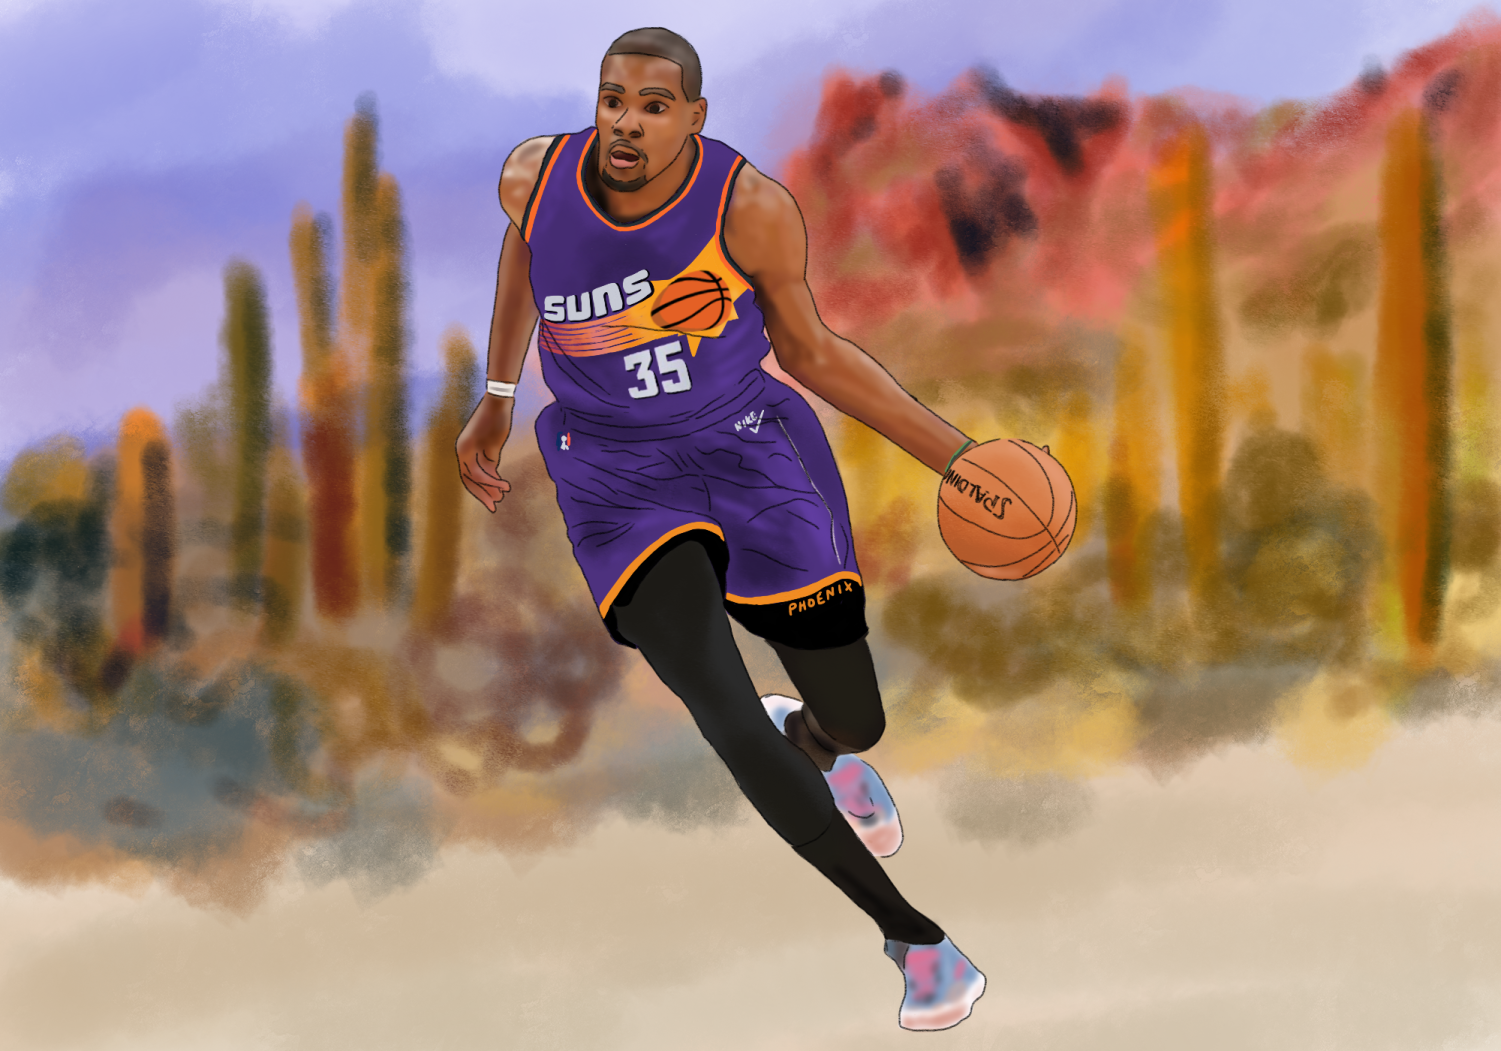 KEVIN DURANT IS NOW ON THE PHOENIX SUNS